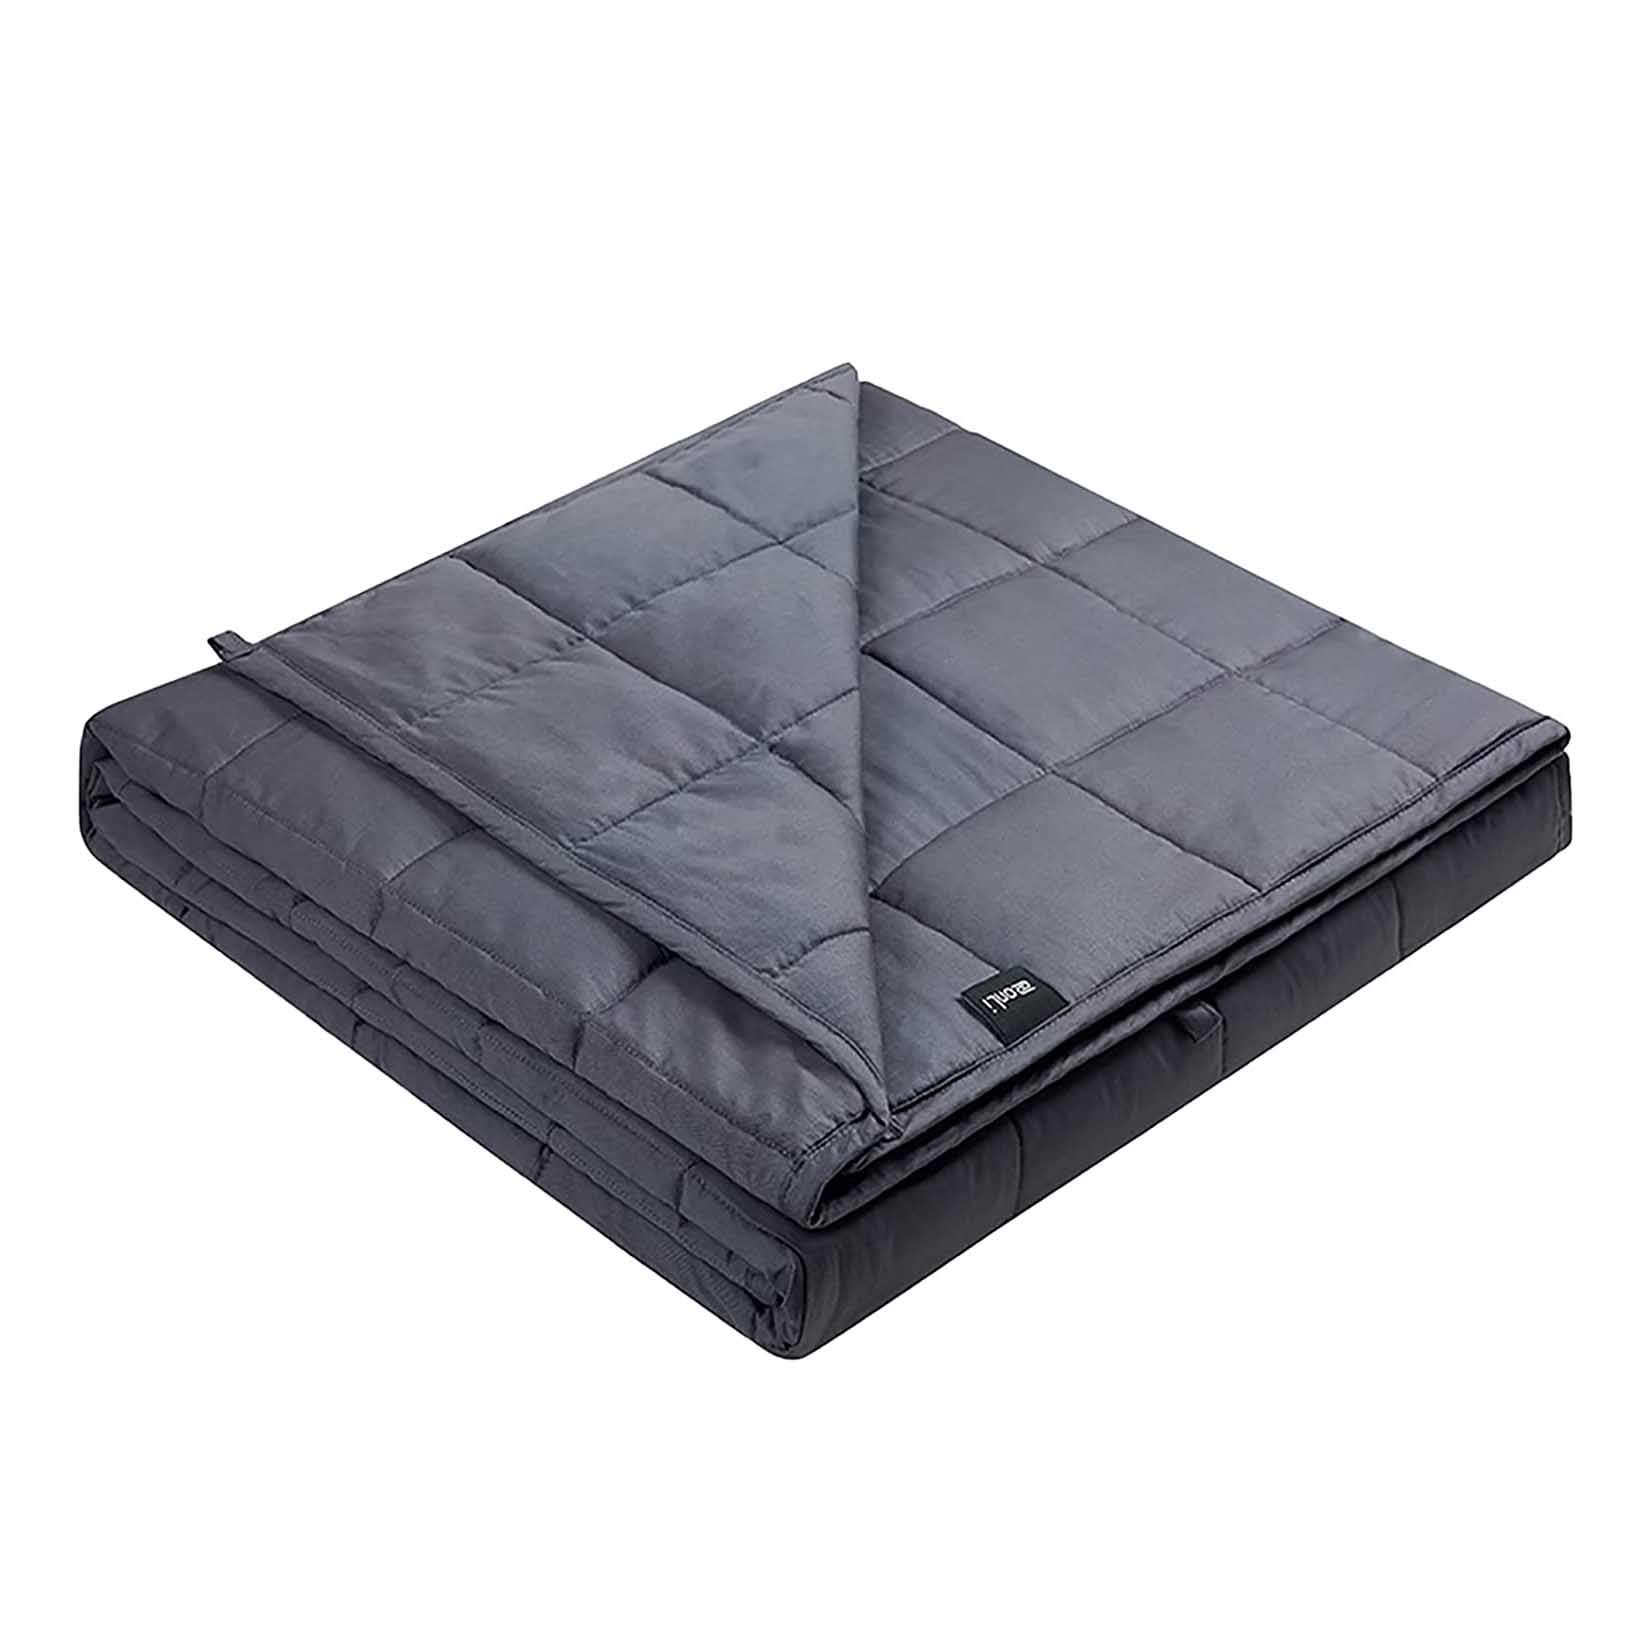 ODM Discount Kids Weighted Blanket Exporter- Weighted Blanket (60”x80”, 20lbs, Dark Grey), Cooling Weighted Blanket for Adults, High Breathability Heavy Blanket, Soft Material with Pre...